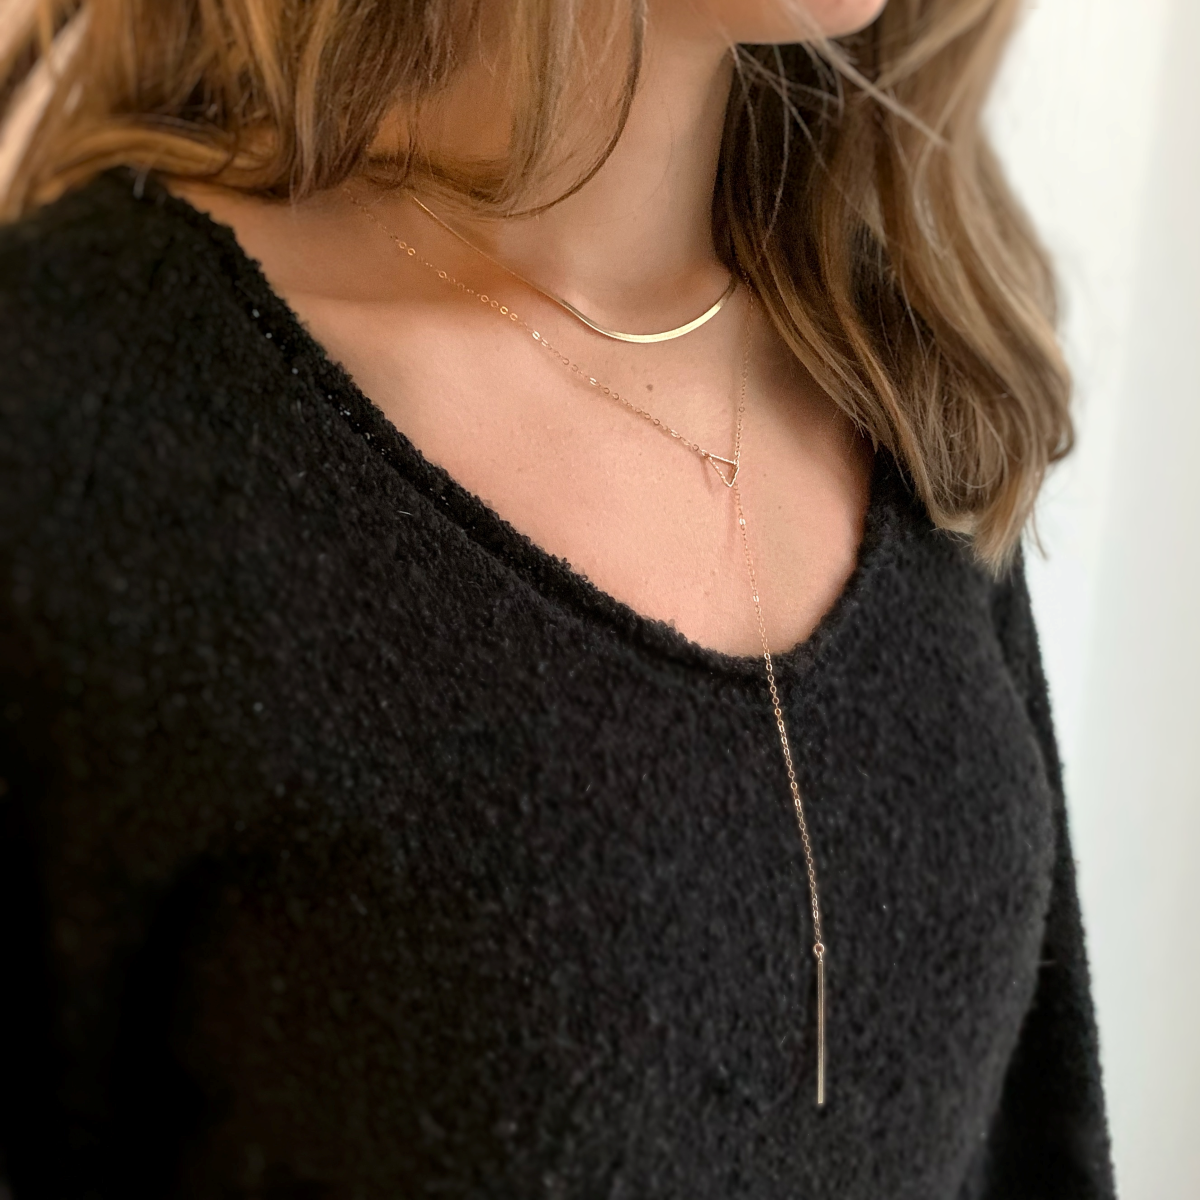 Model wearing gold filled bar lariat necklace and gold herringbone necklace